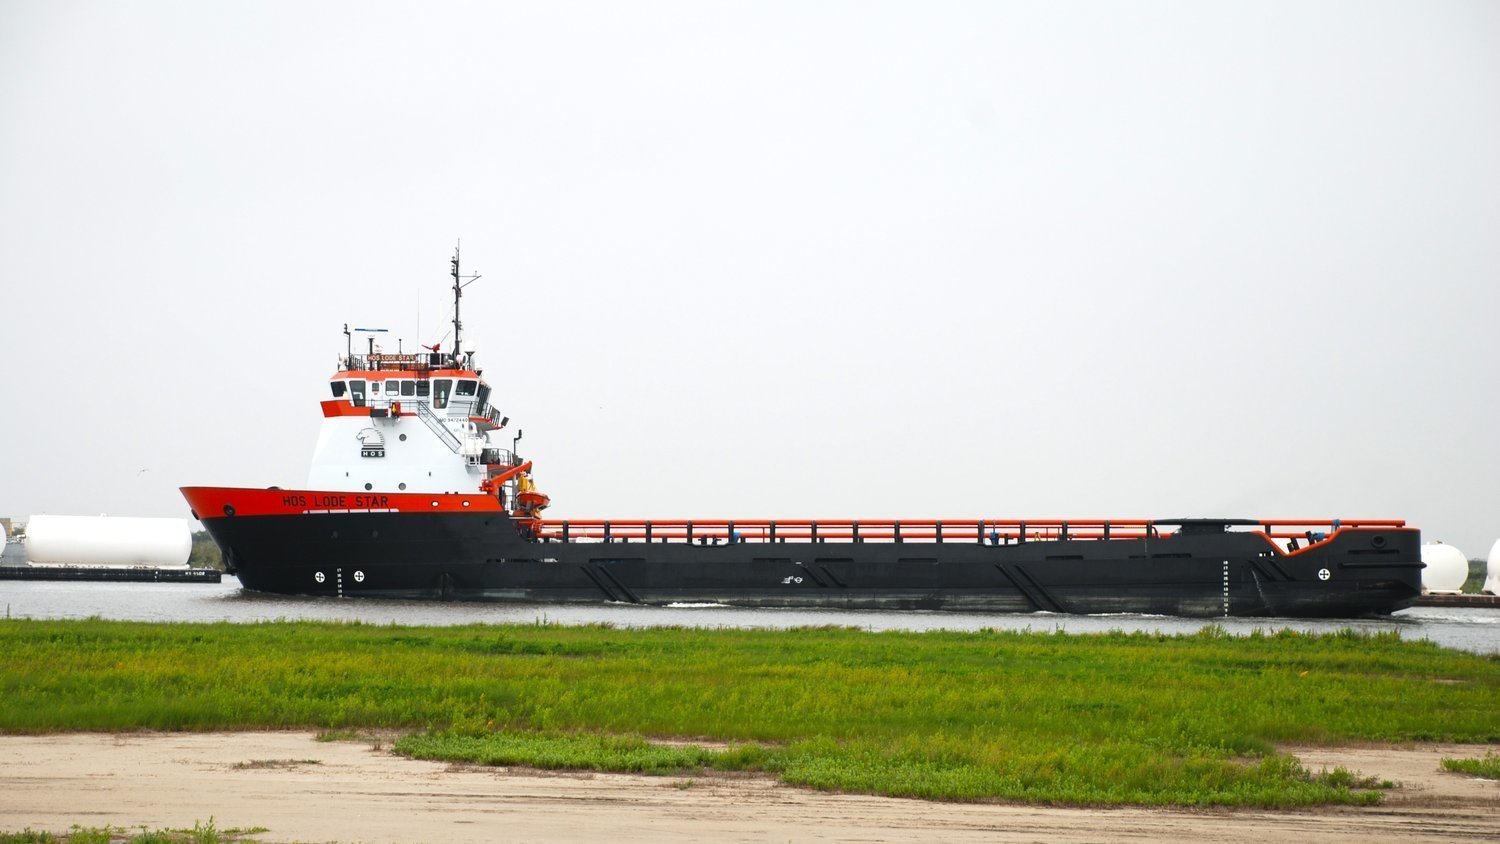 The Steamship Authority bought this offshore supply vessel and two others to replace its aging freight boats.